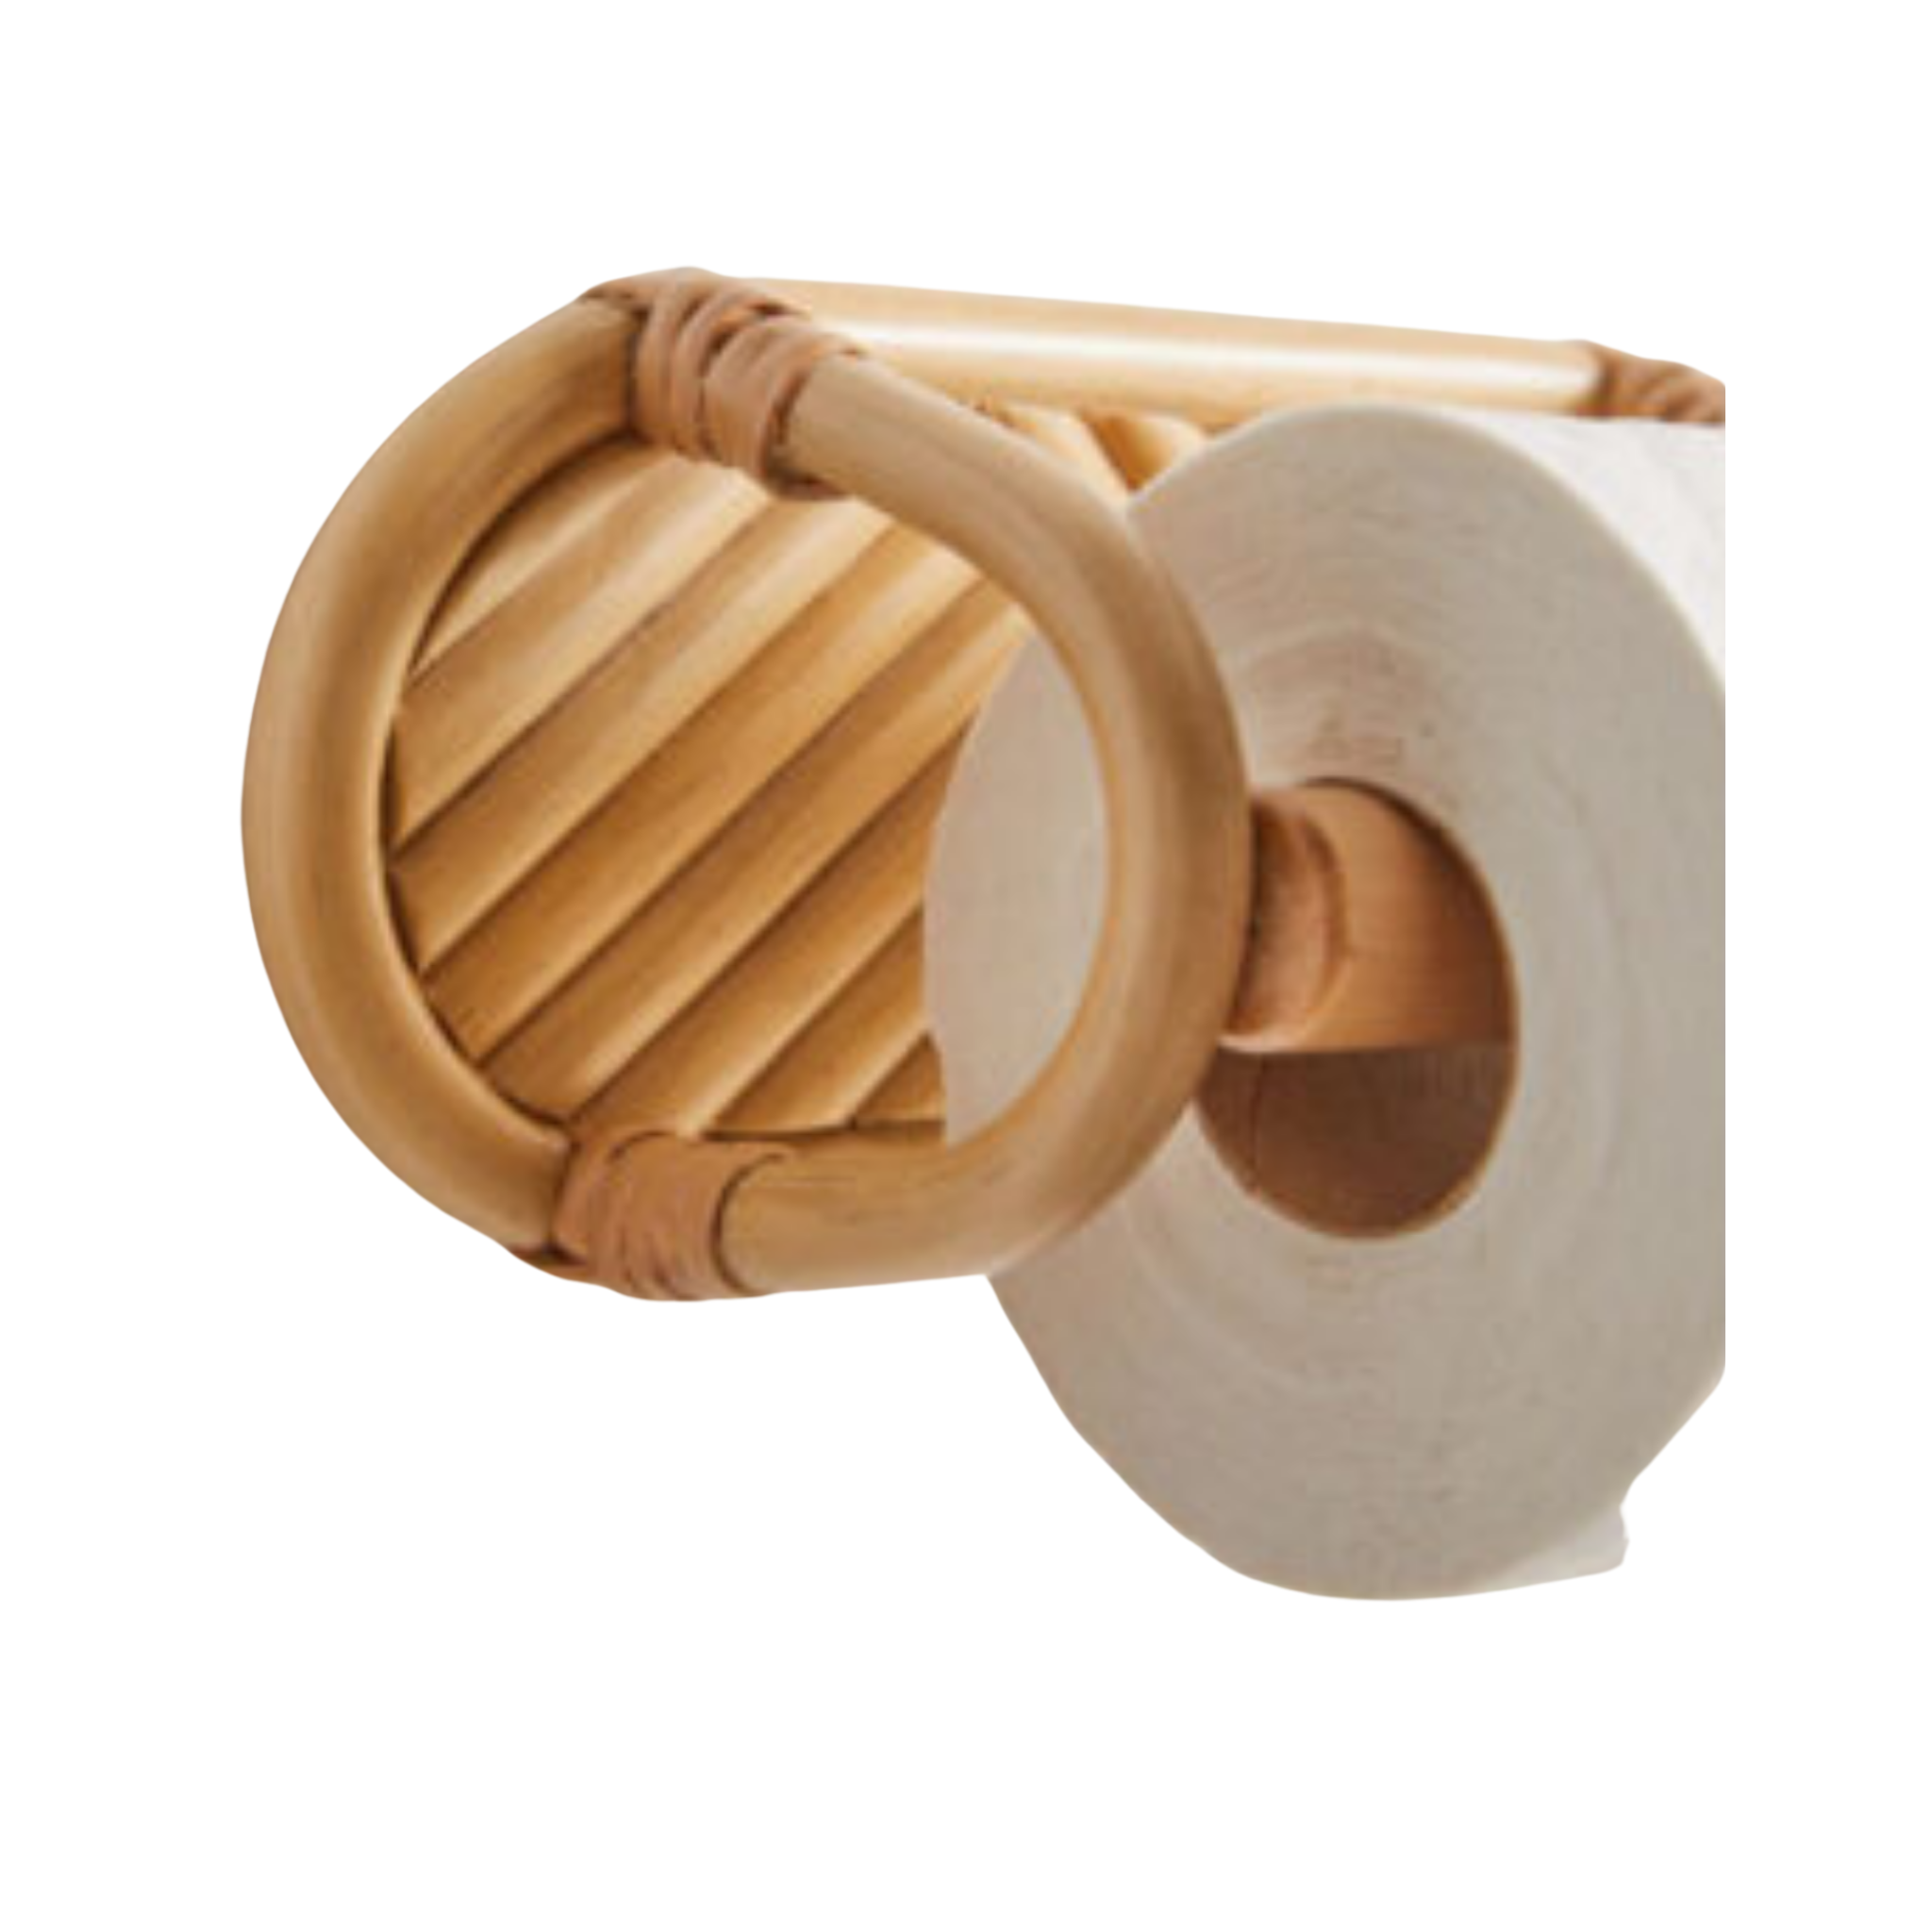 Stitches and Tweed - Rattan Toilet Roll Holder - Everyday Vegan Grocer